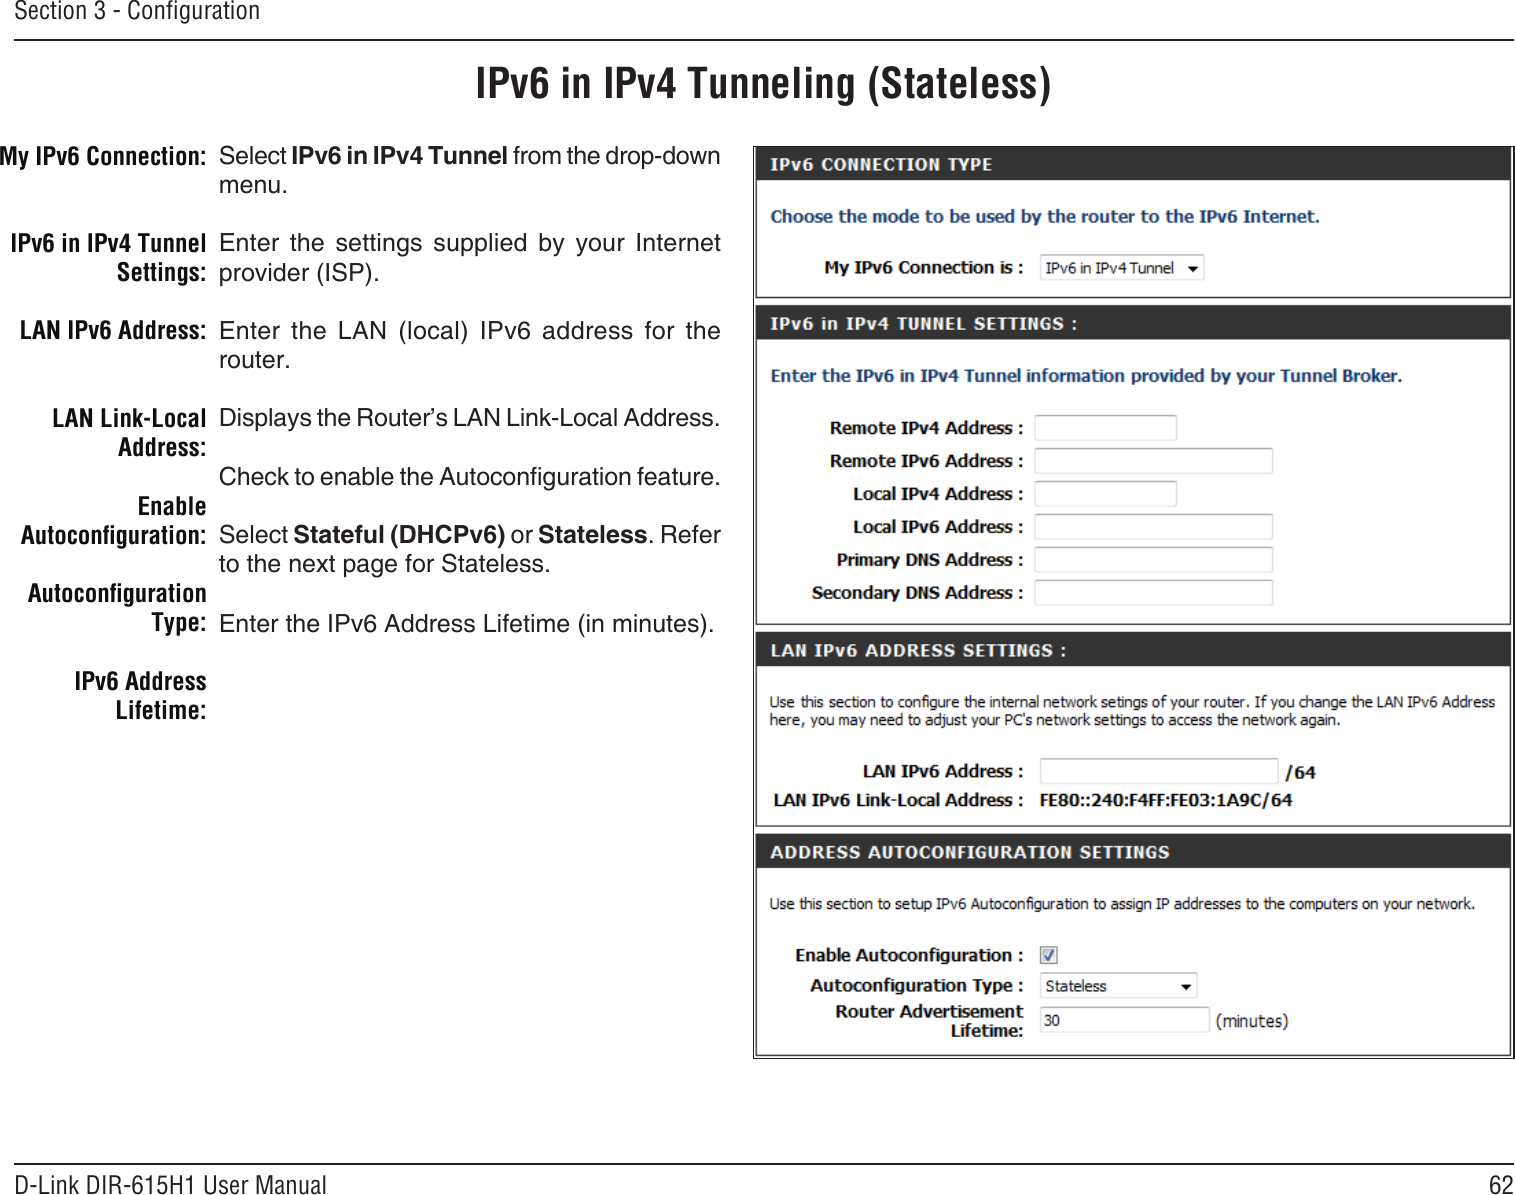 62D-Link DIR-615H1 User ManualSection 3 - CongurationIPv6 in IPv4 Tunneling (Stateless)Select IPv6 in IPv4 Tunnel from the drop-down menu.Enter  the  settings  supplied  by  your  Internet provider (ISP). Enter  the  LAN  (local)  IPv6  address  for  the router. Displays the Router’s LAN Link-Local Address.Check to enable the Autoconguration feature.Select Stateful (DHCPv6) or Stateless. Refer to the next page for Stateless.Enter the IPv6 Address Lifetime (in minutes).My IPv6 Connection:IPv6 in IPv4 Tunnel Settings:LAN IPv6 Address:LAN Link-Local Address:Enable Autoconguration:Autoconguration Type:IPv6 Address Lifetime: